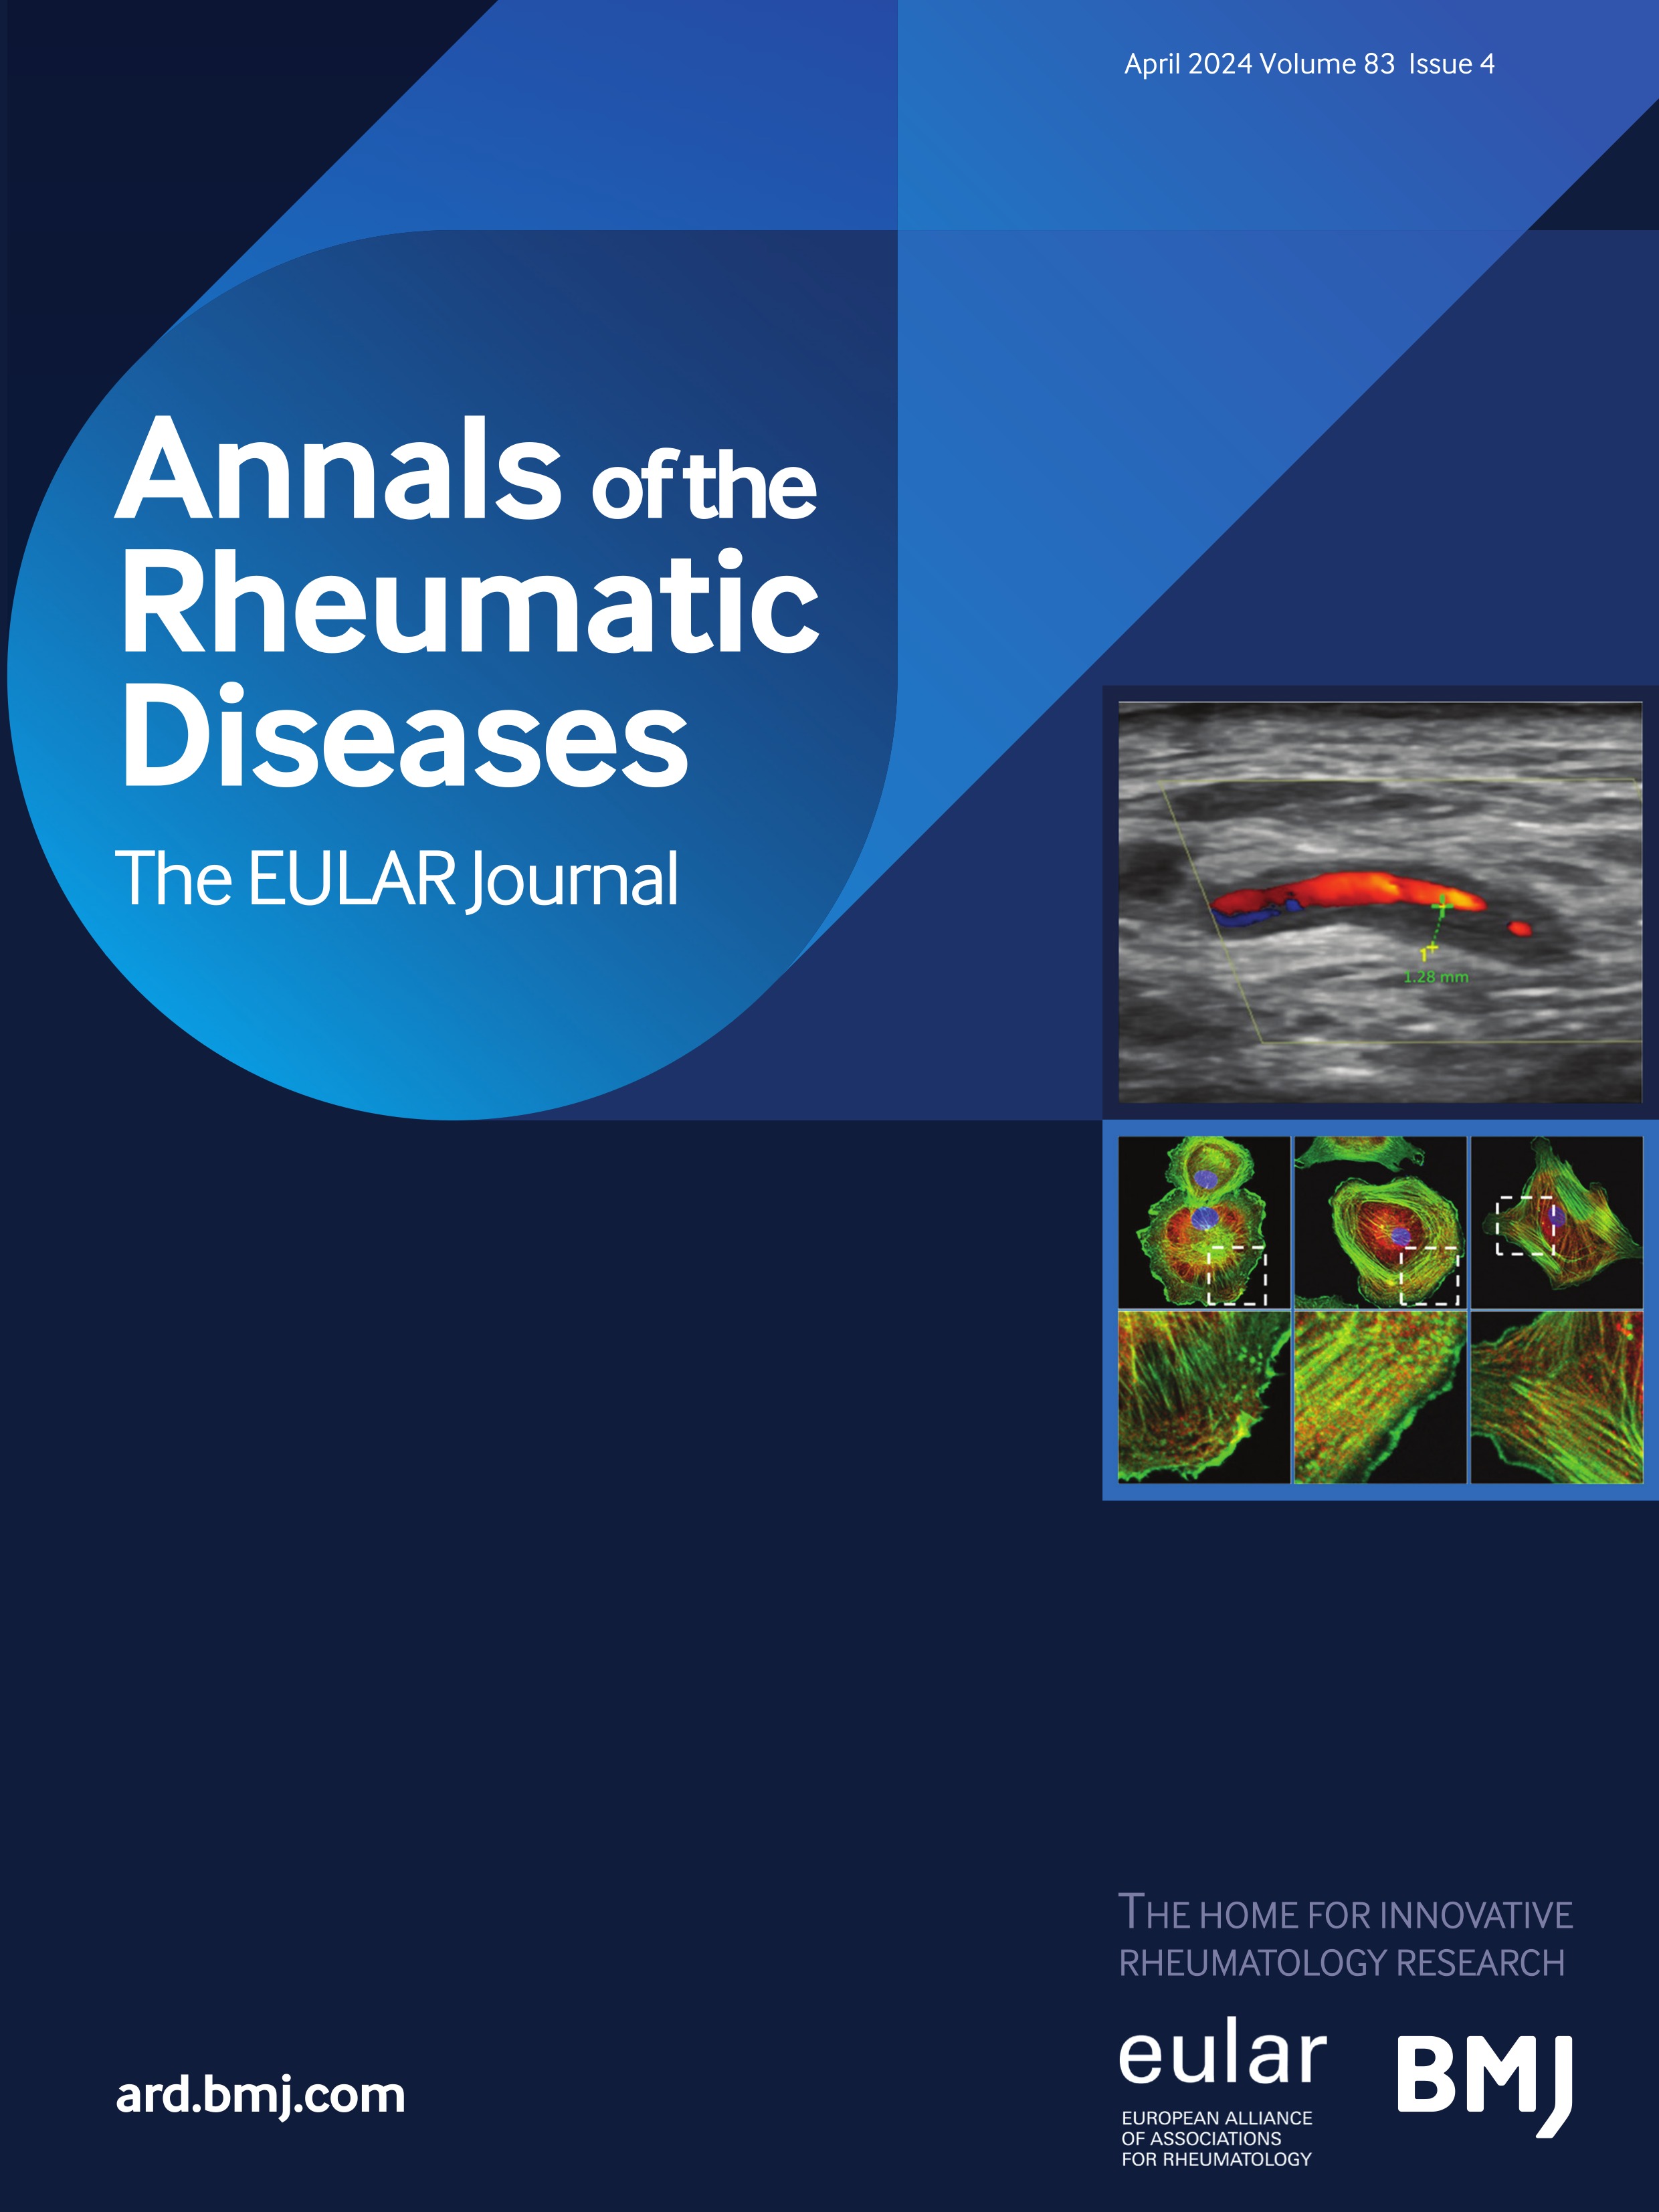 Lower body mass and lower adiposity are associated with differential responses to two treatment strategies for rheumatoid arthritis